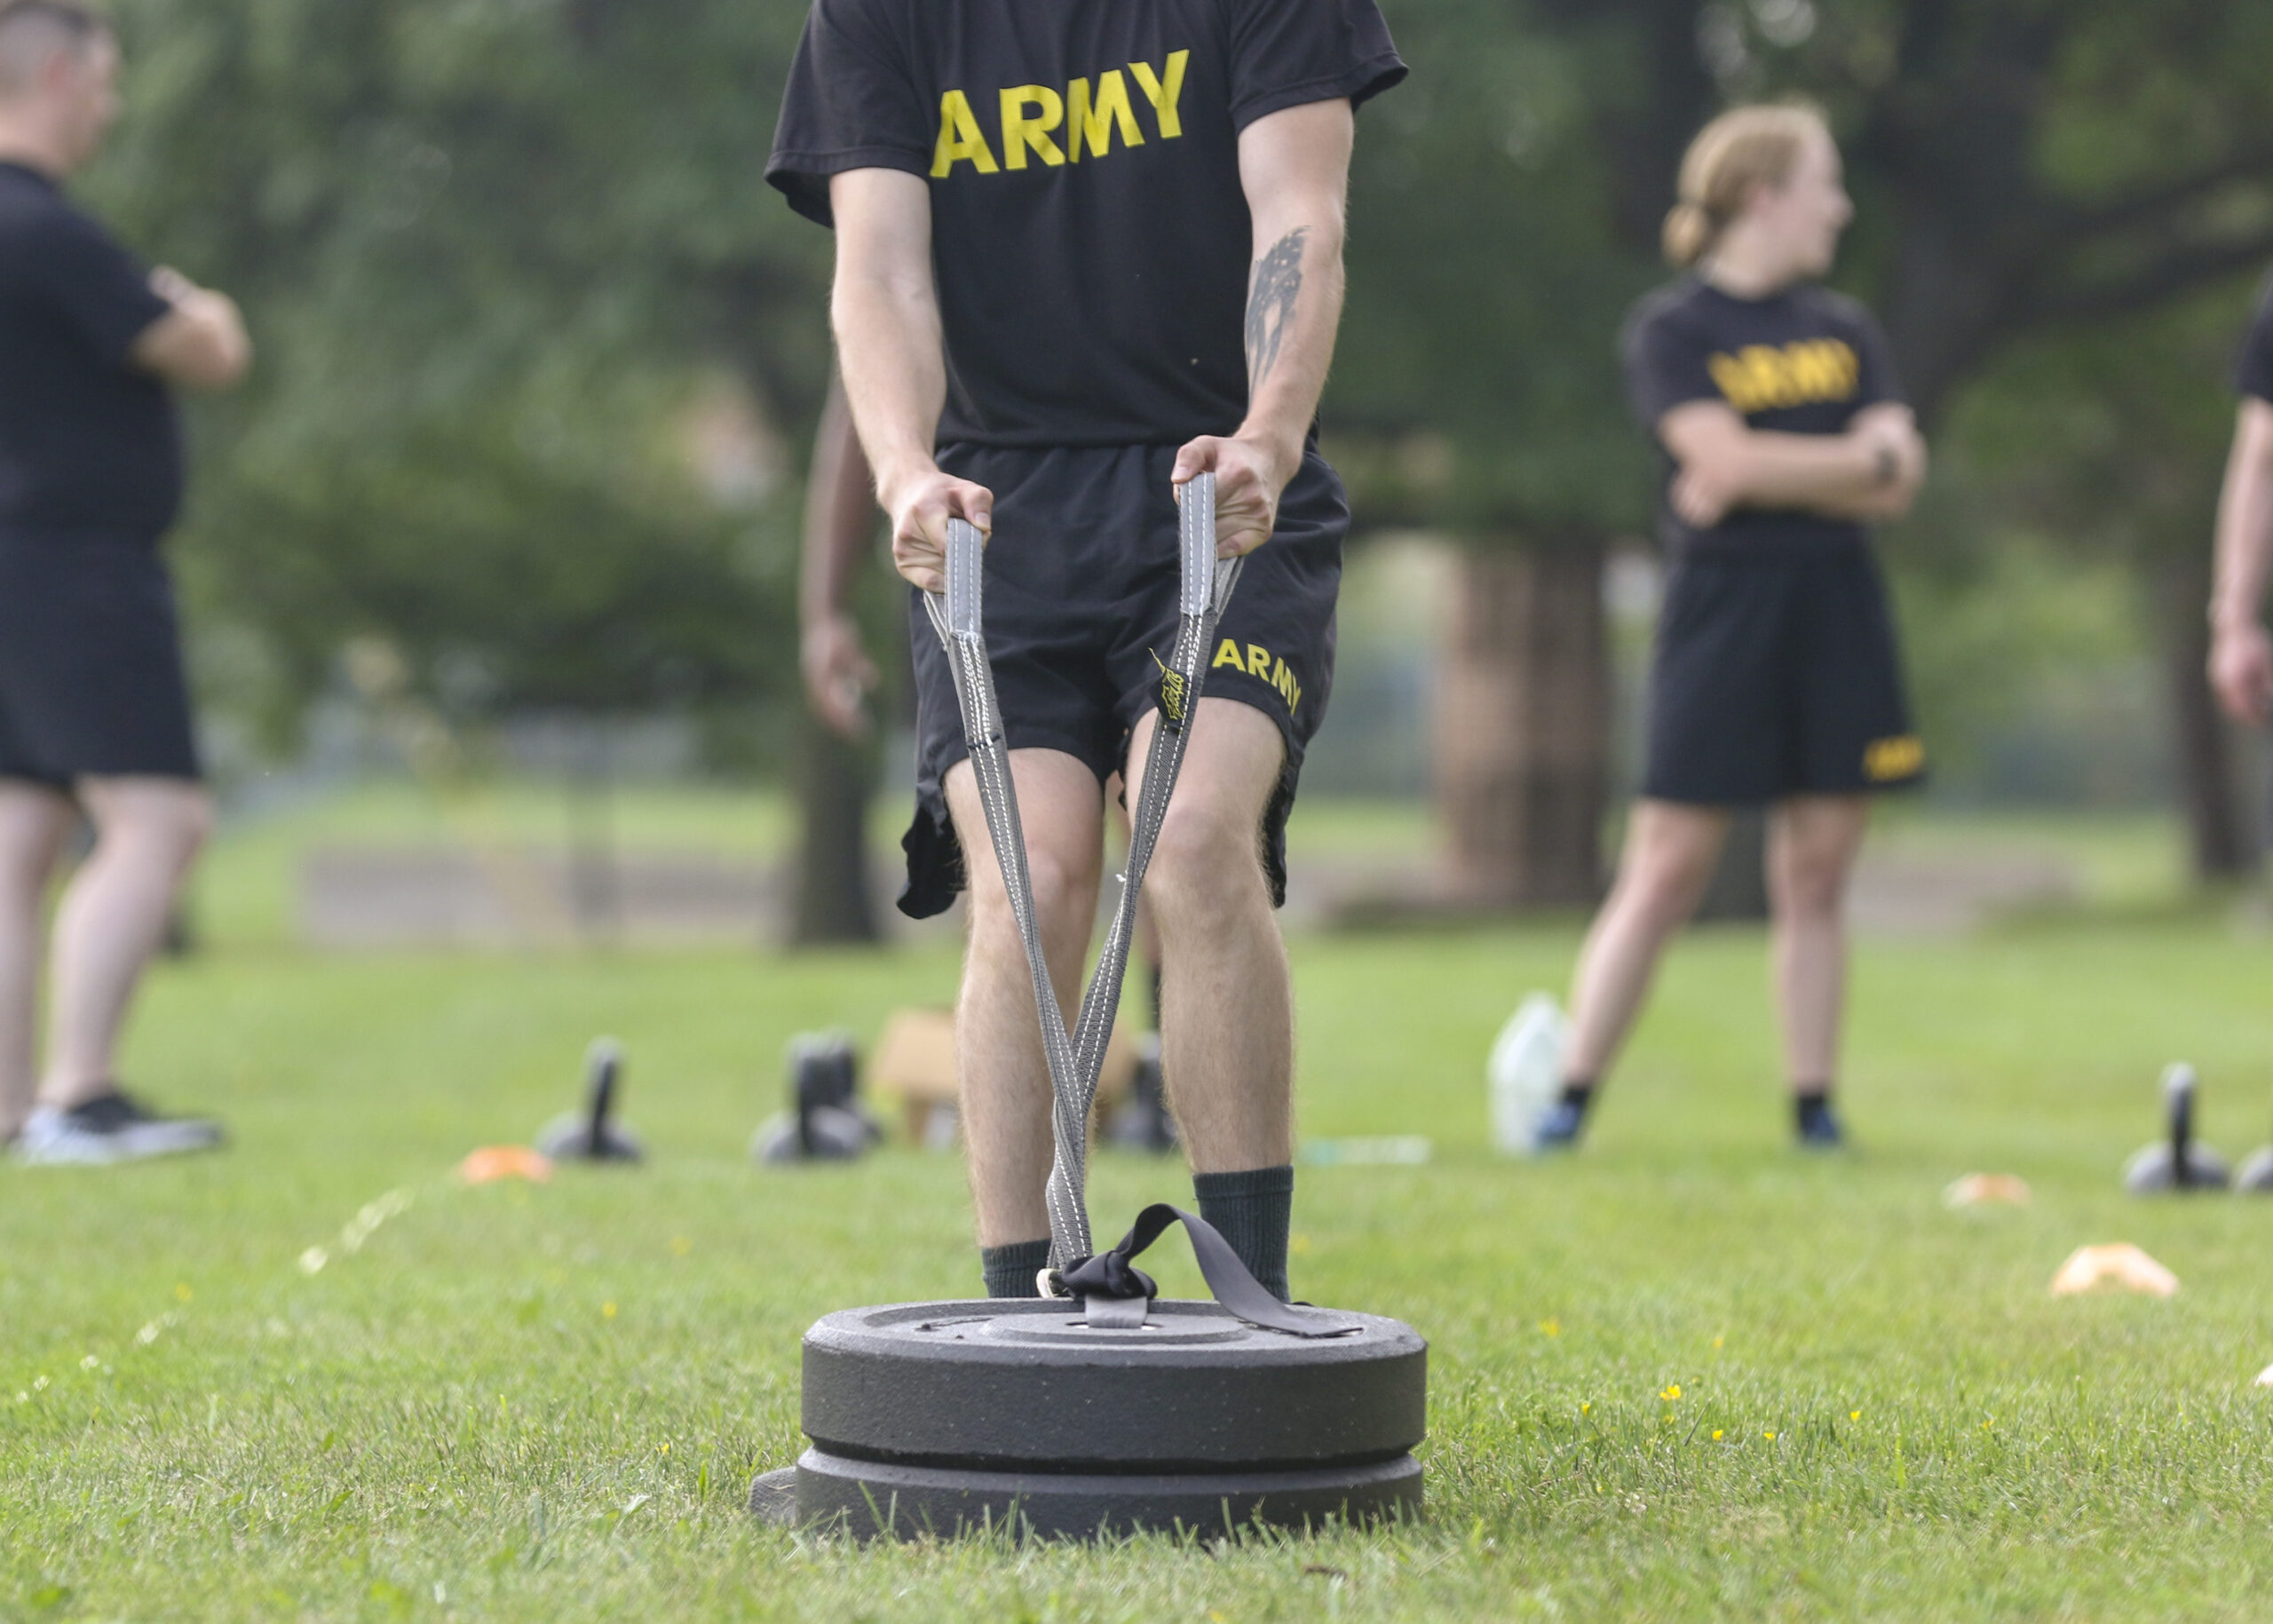 Army must “increase” fitness standards, but can use gender-specific scores